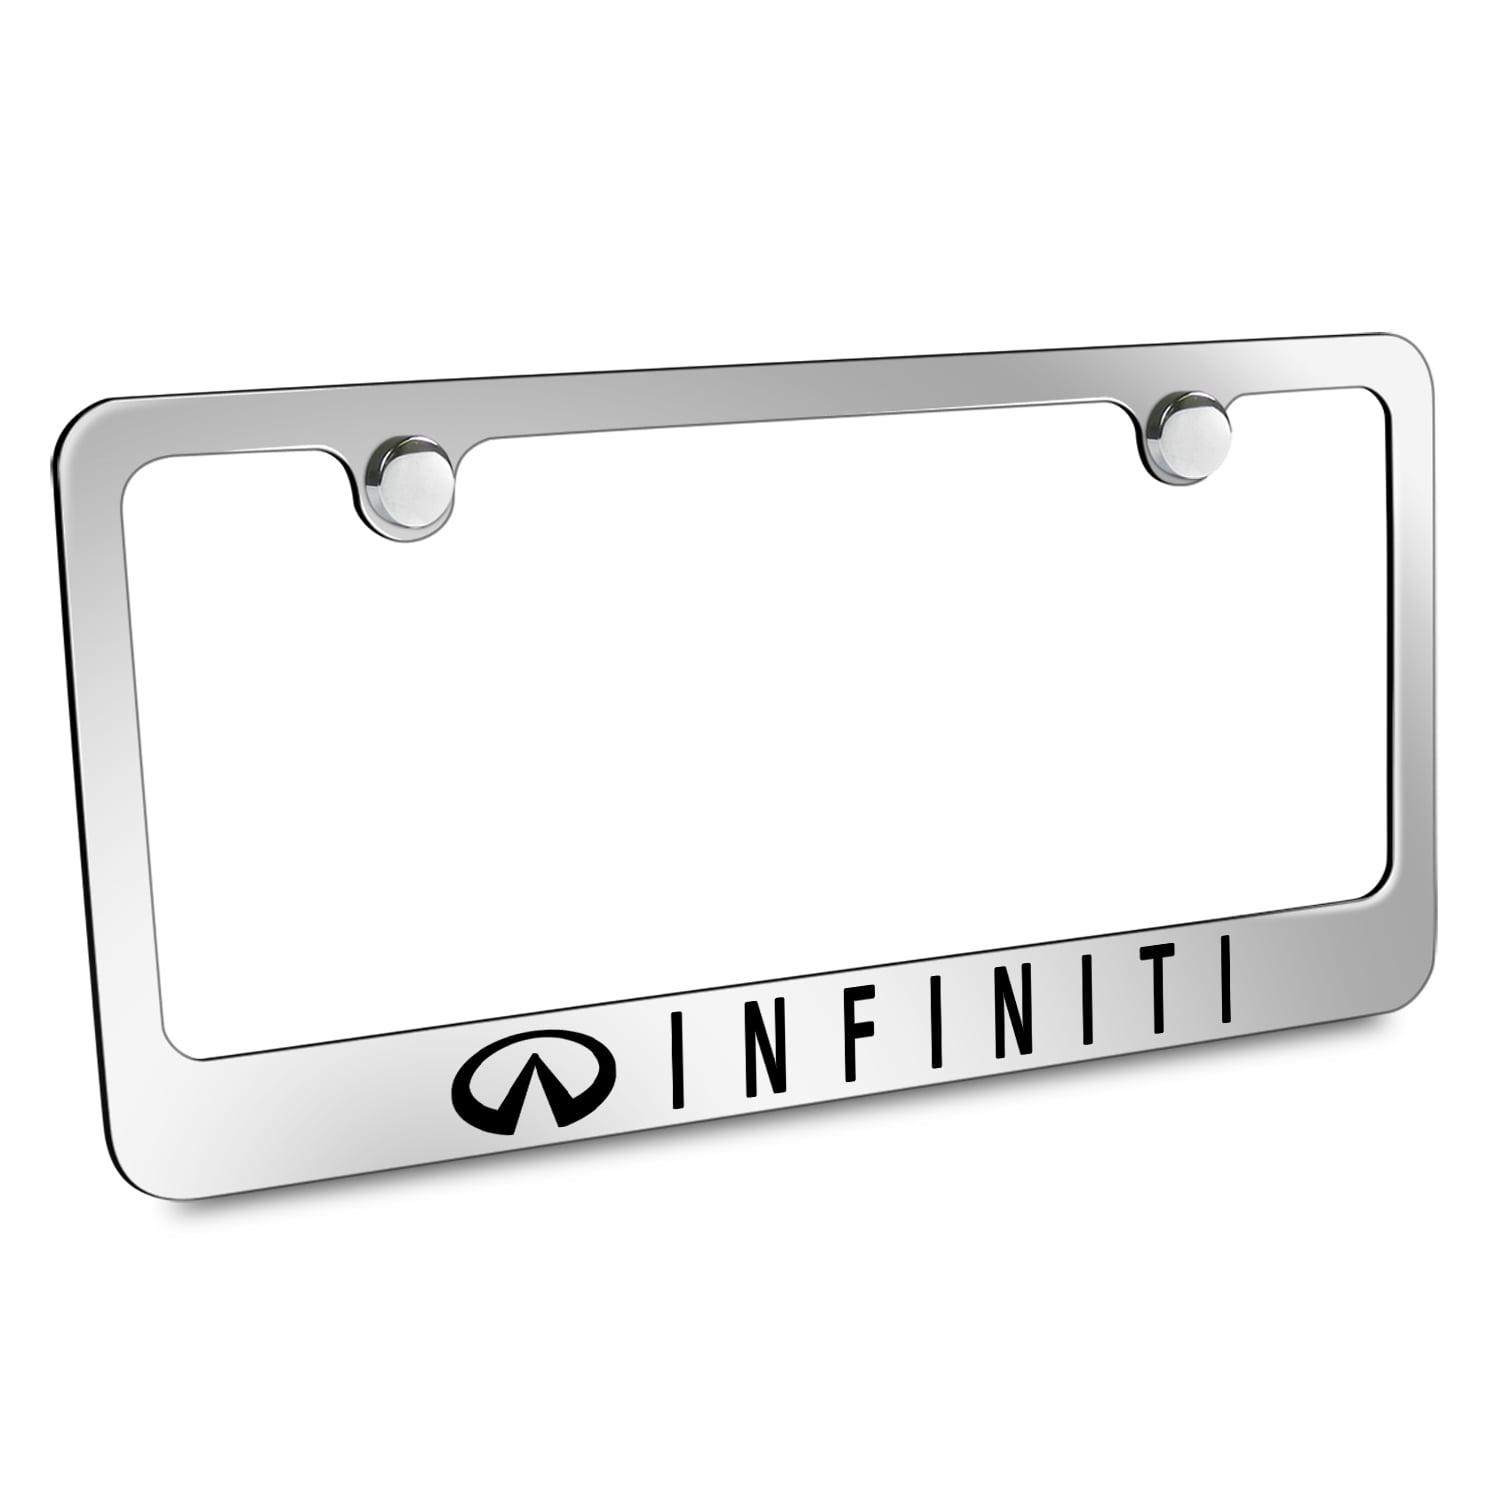 3D Metal tag License Plate Frame for Infiniti,Black Infiniti tag License Cover,Decorate Front License Plate